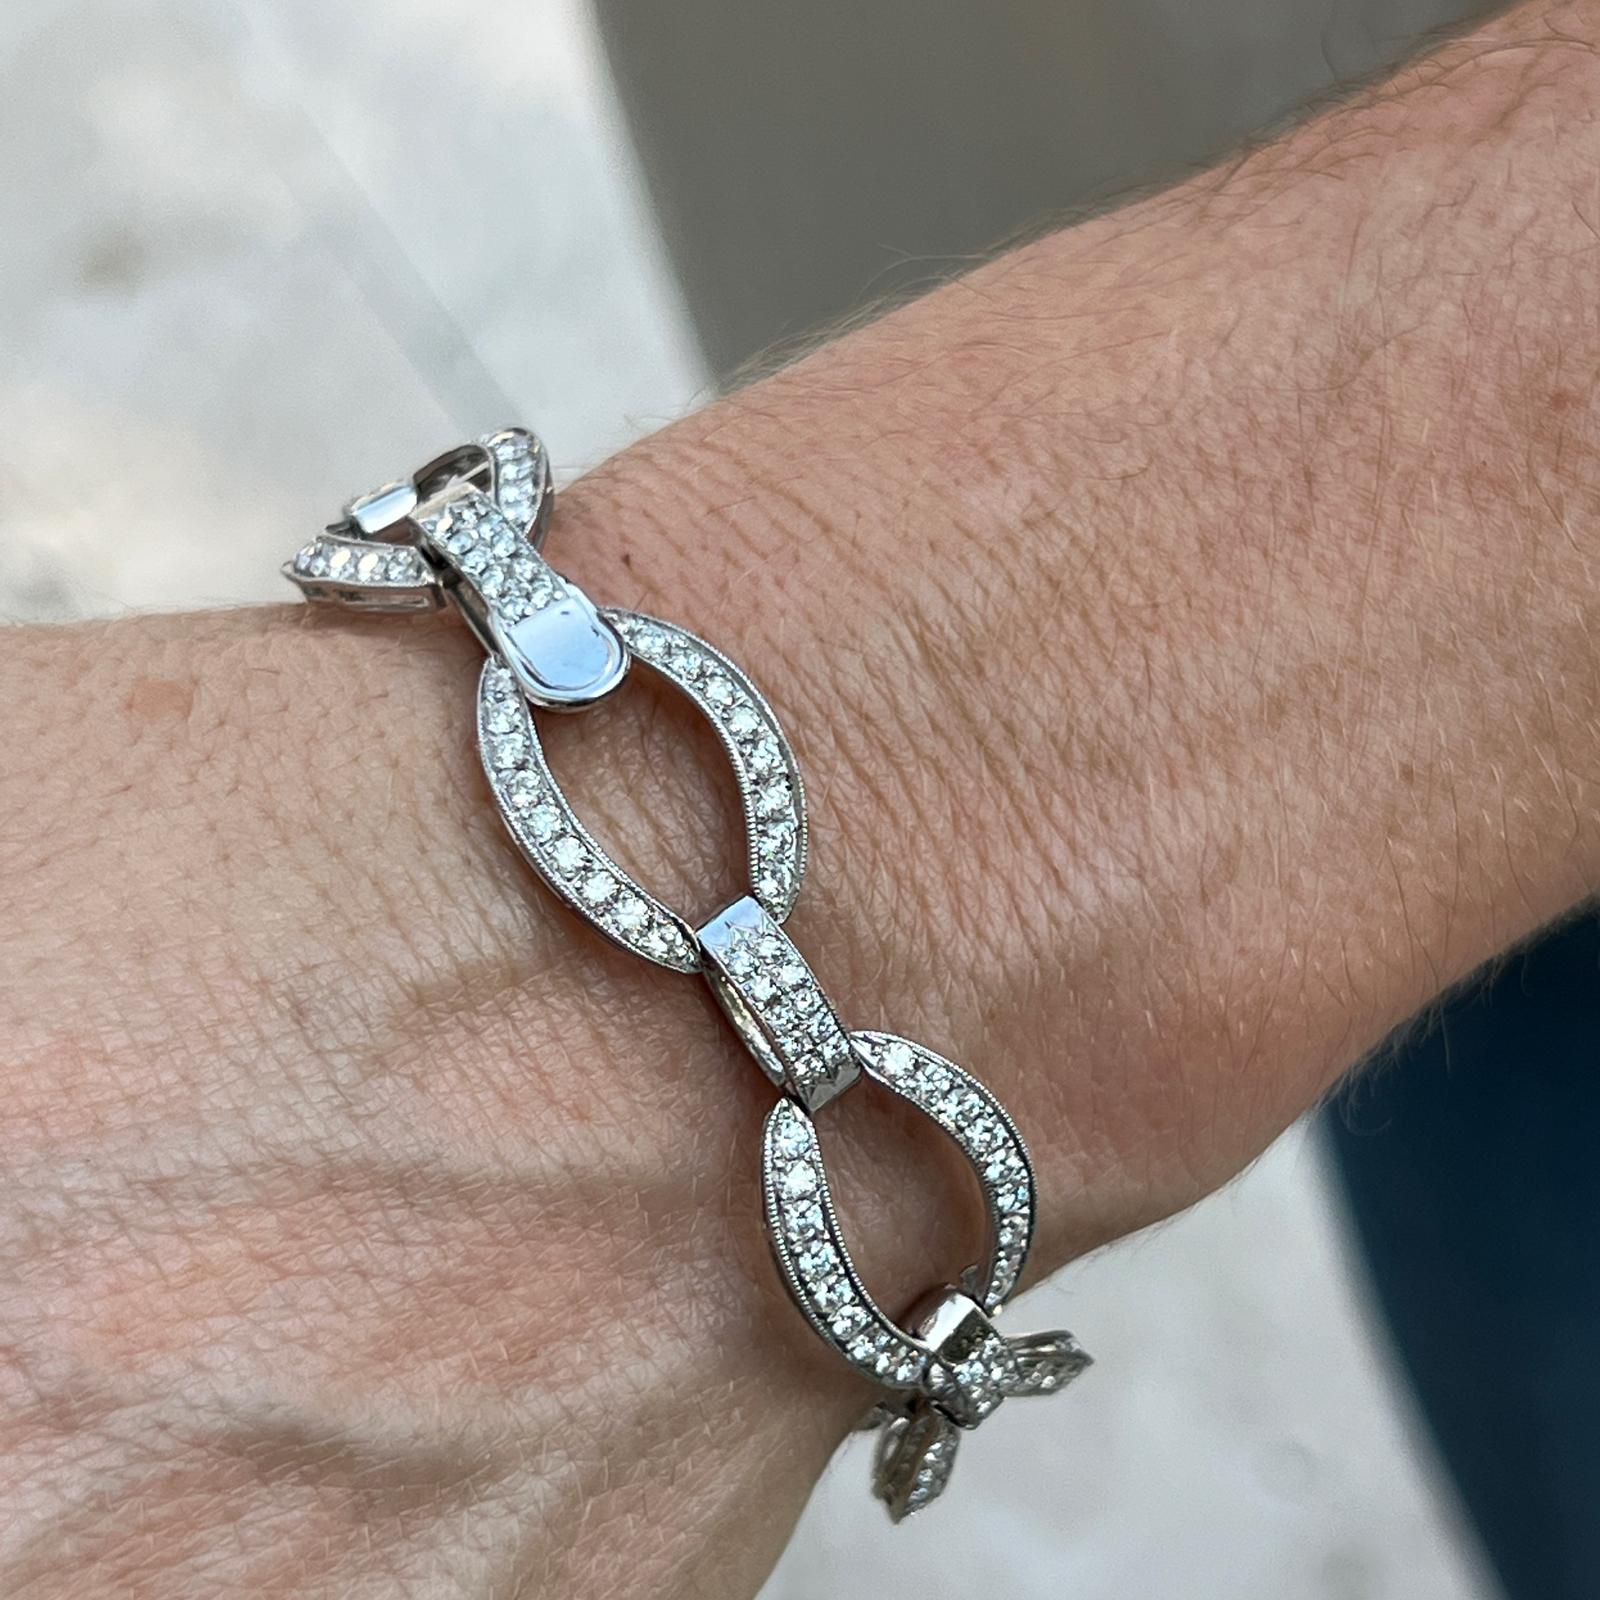 Timeless diamond link bracelet crafted in platinum. The bracelet features round brilliant cut diamond oval links weighing approximately 7.00 carat total weight. The diamonds are graded F-G color and VS clarity. The bracelet features milgrain edging